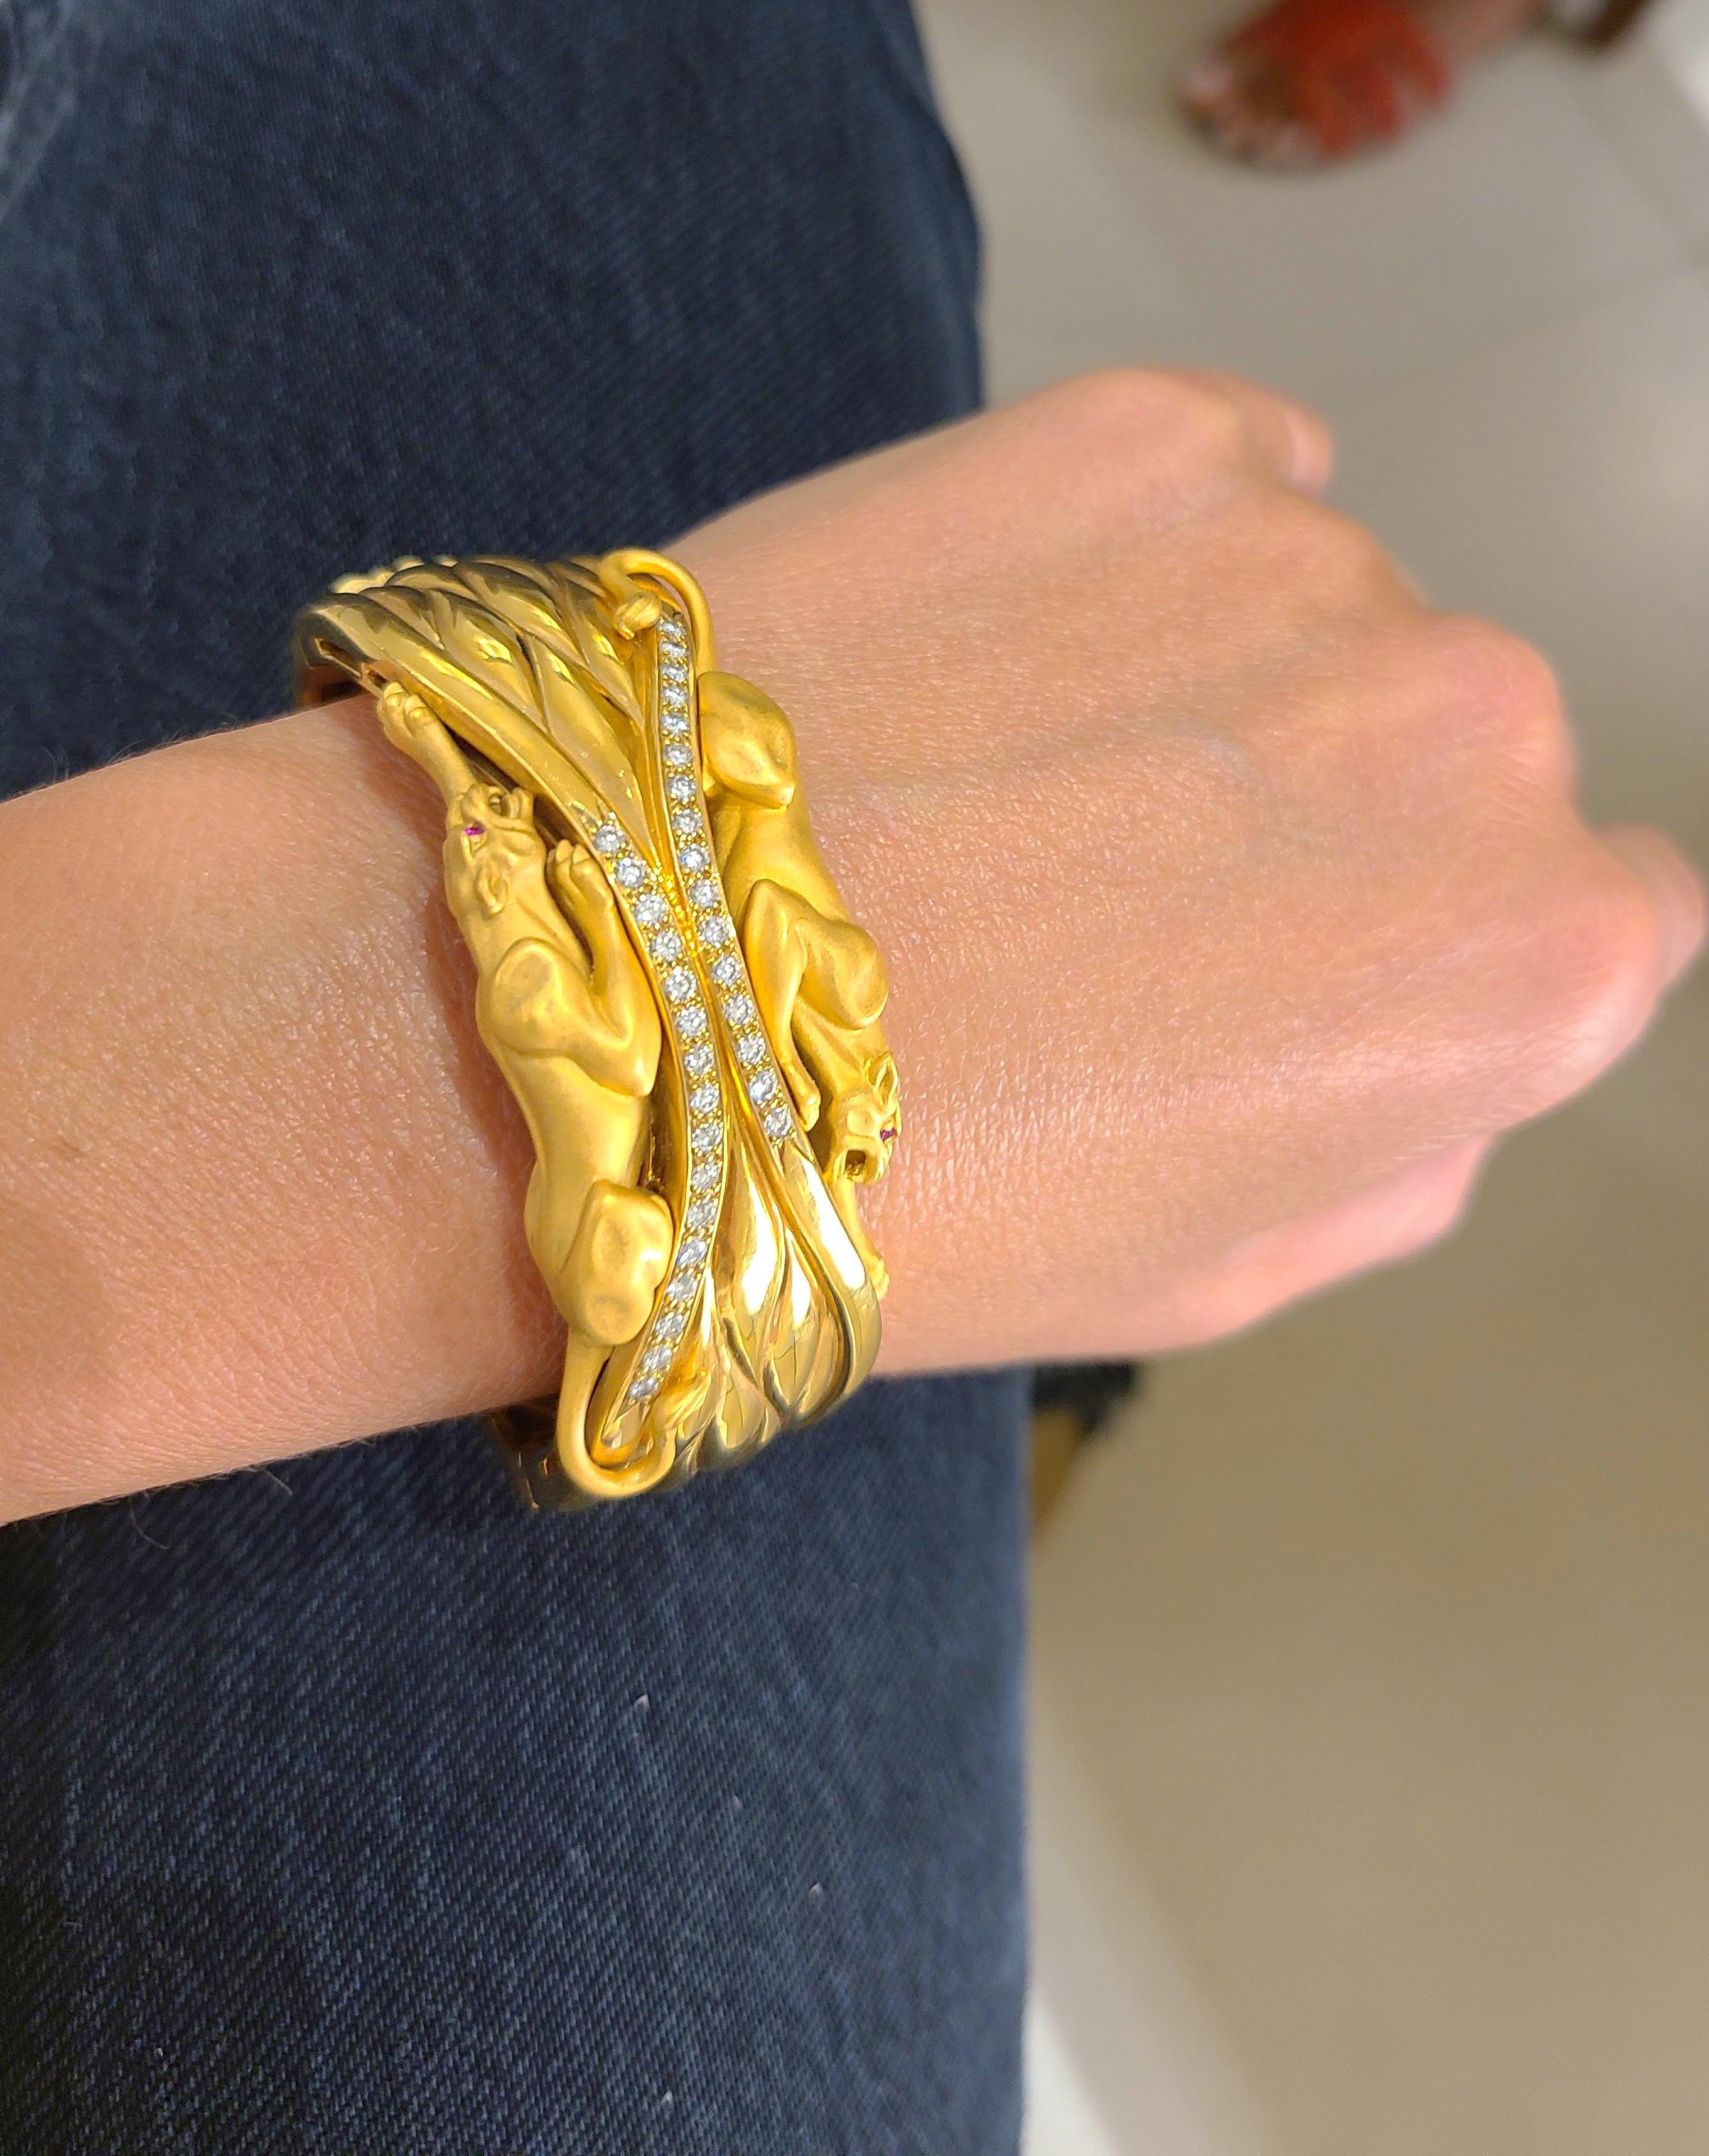 Carrera Y Carrera has built its famous name on figurative designs, an obsession with surface finishes, and a compelling way of seeing beauty in art and nature. This 18 karat yellow gold cuff bracelet is a perfect example of Carrera's iconic